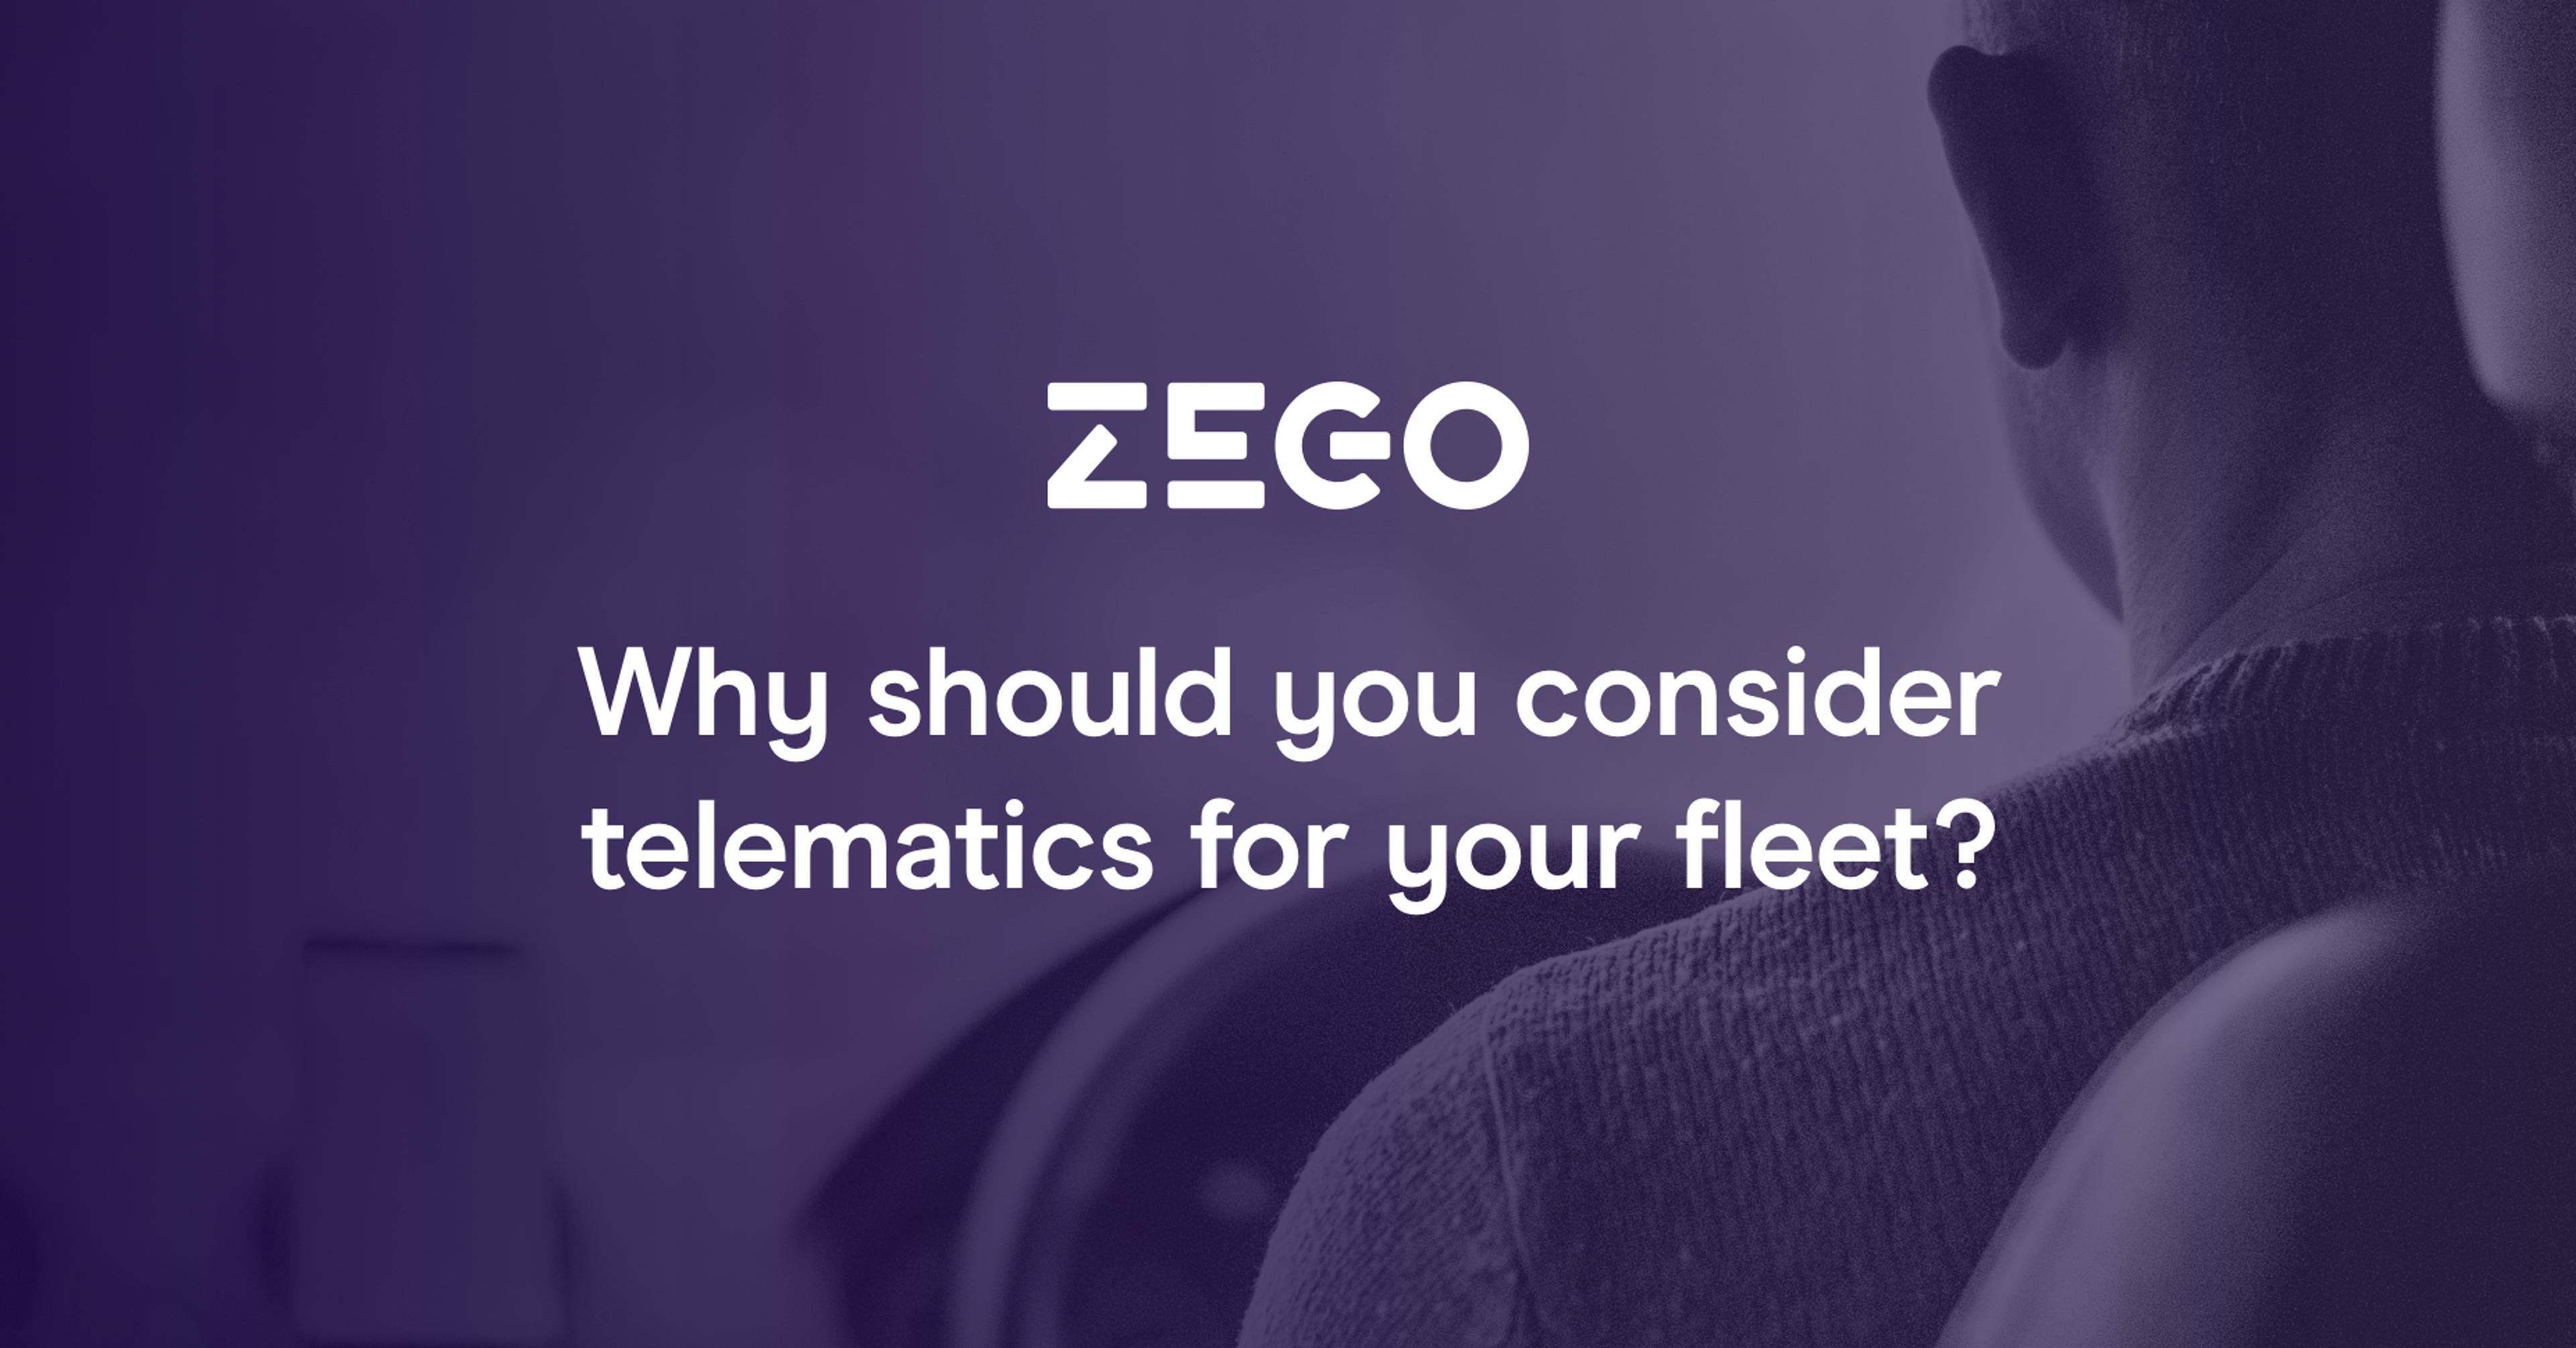 Why should you consider telematics for your fleet?
